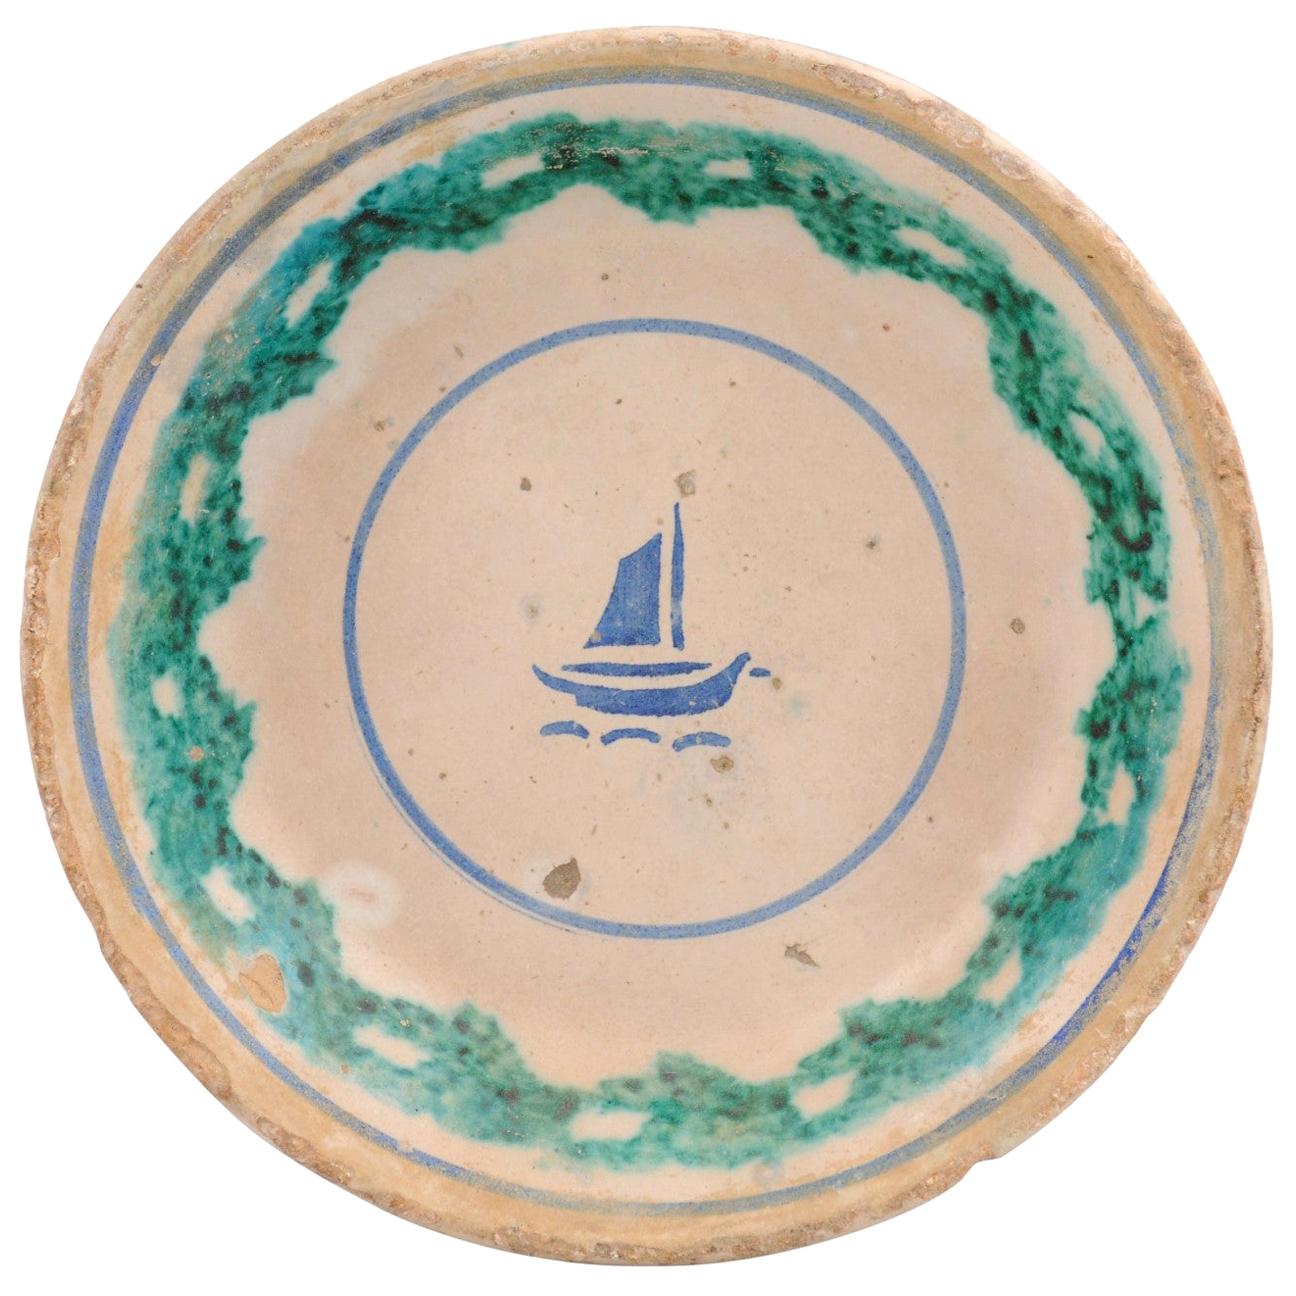 Italian 1895 Pottery Platter with Blue Sailboat Motif and Weathered Patina